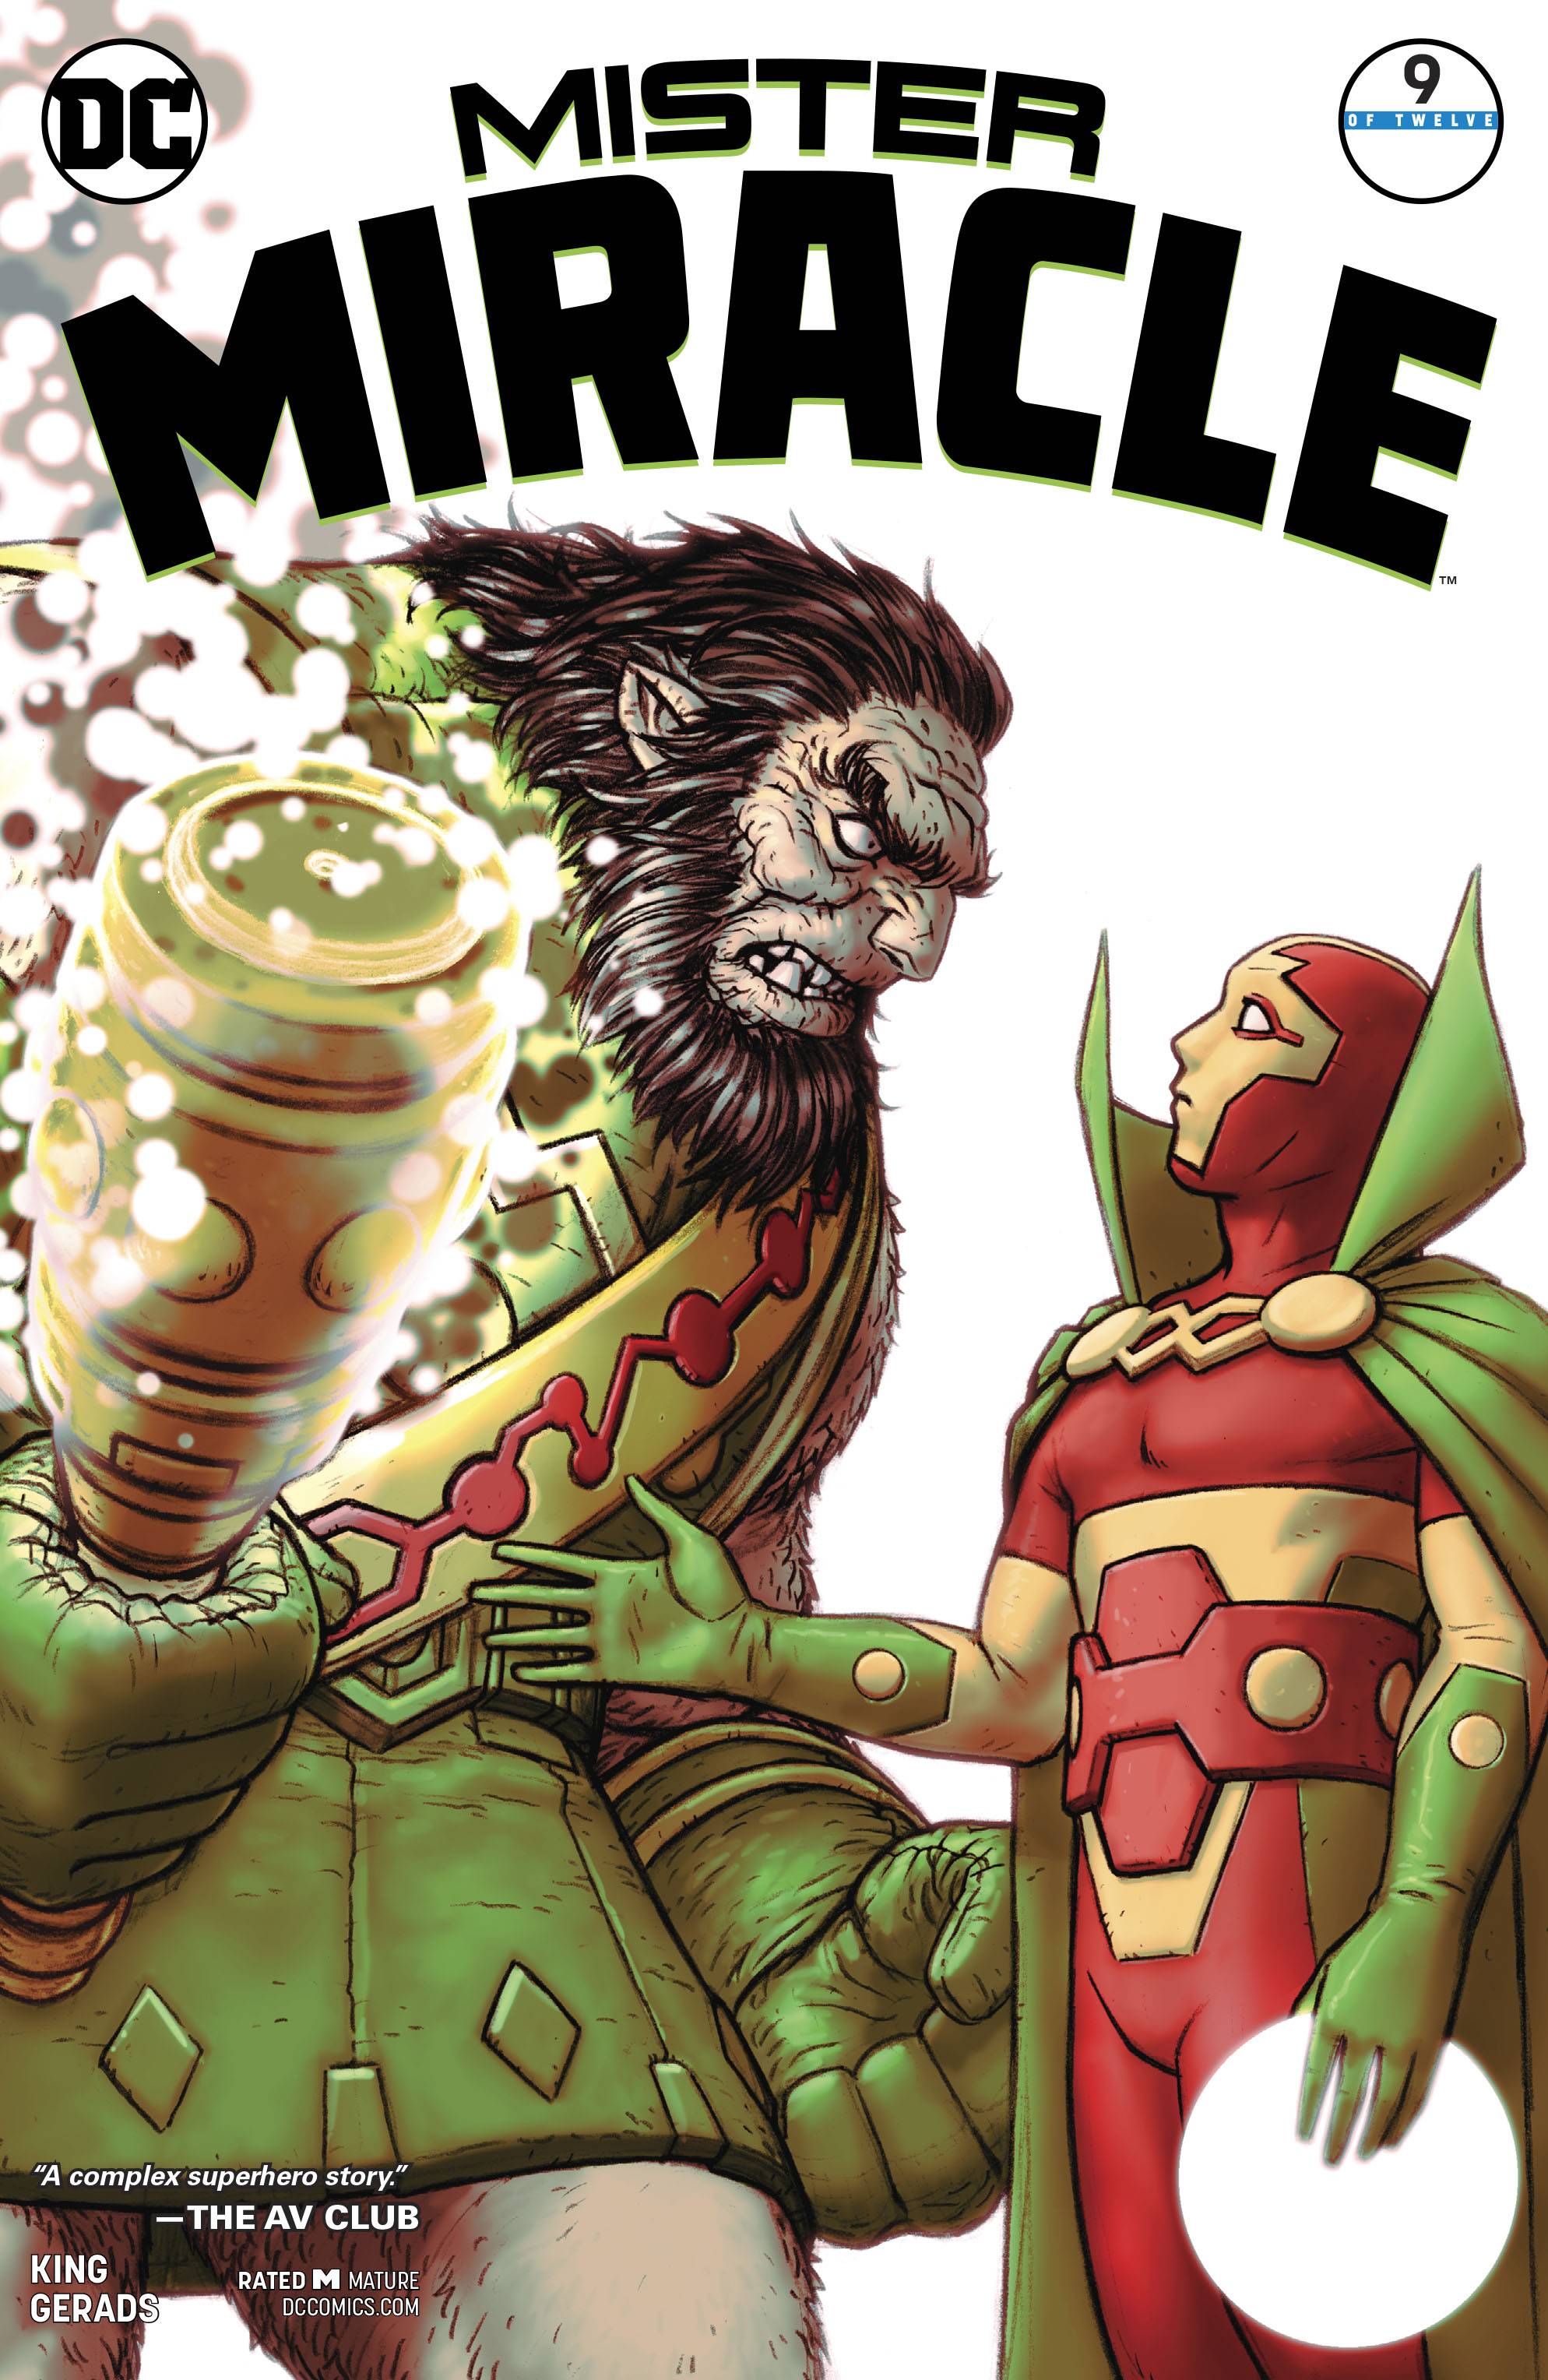 Mister Miracle (4th Series) 9 Comic Book NM